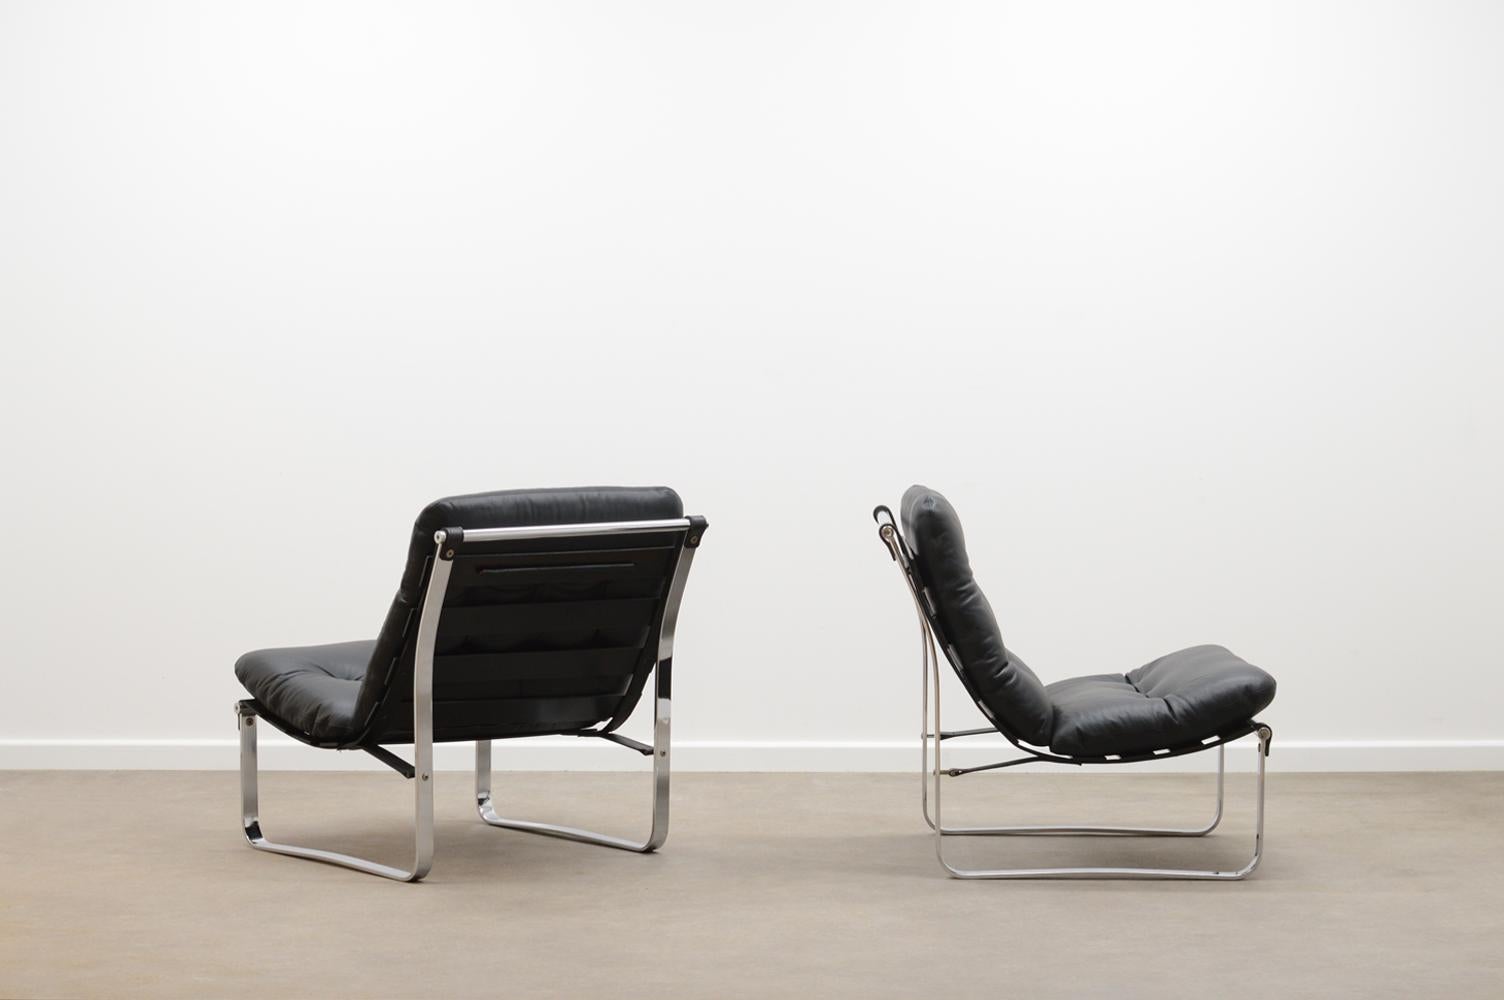 Mid-Century Modern Set of 2 sling chairs by Ico Parisi for MIM Roma, Italy 60’s.